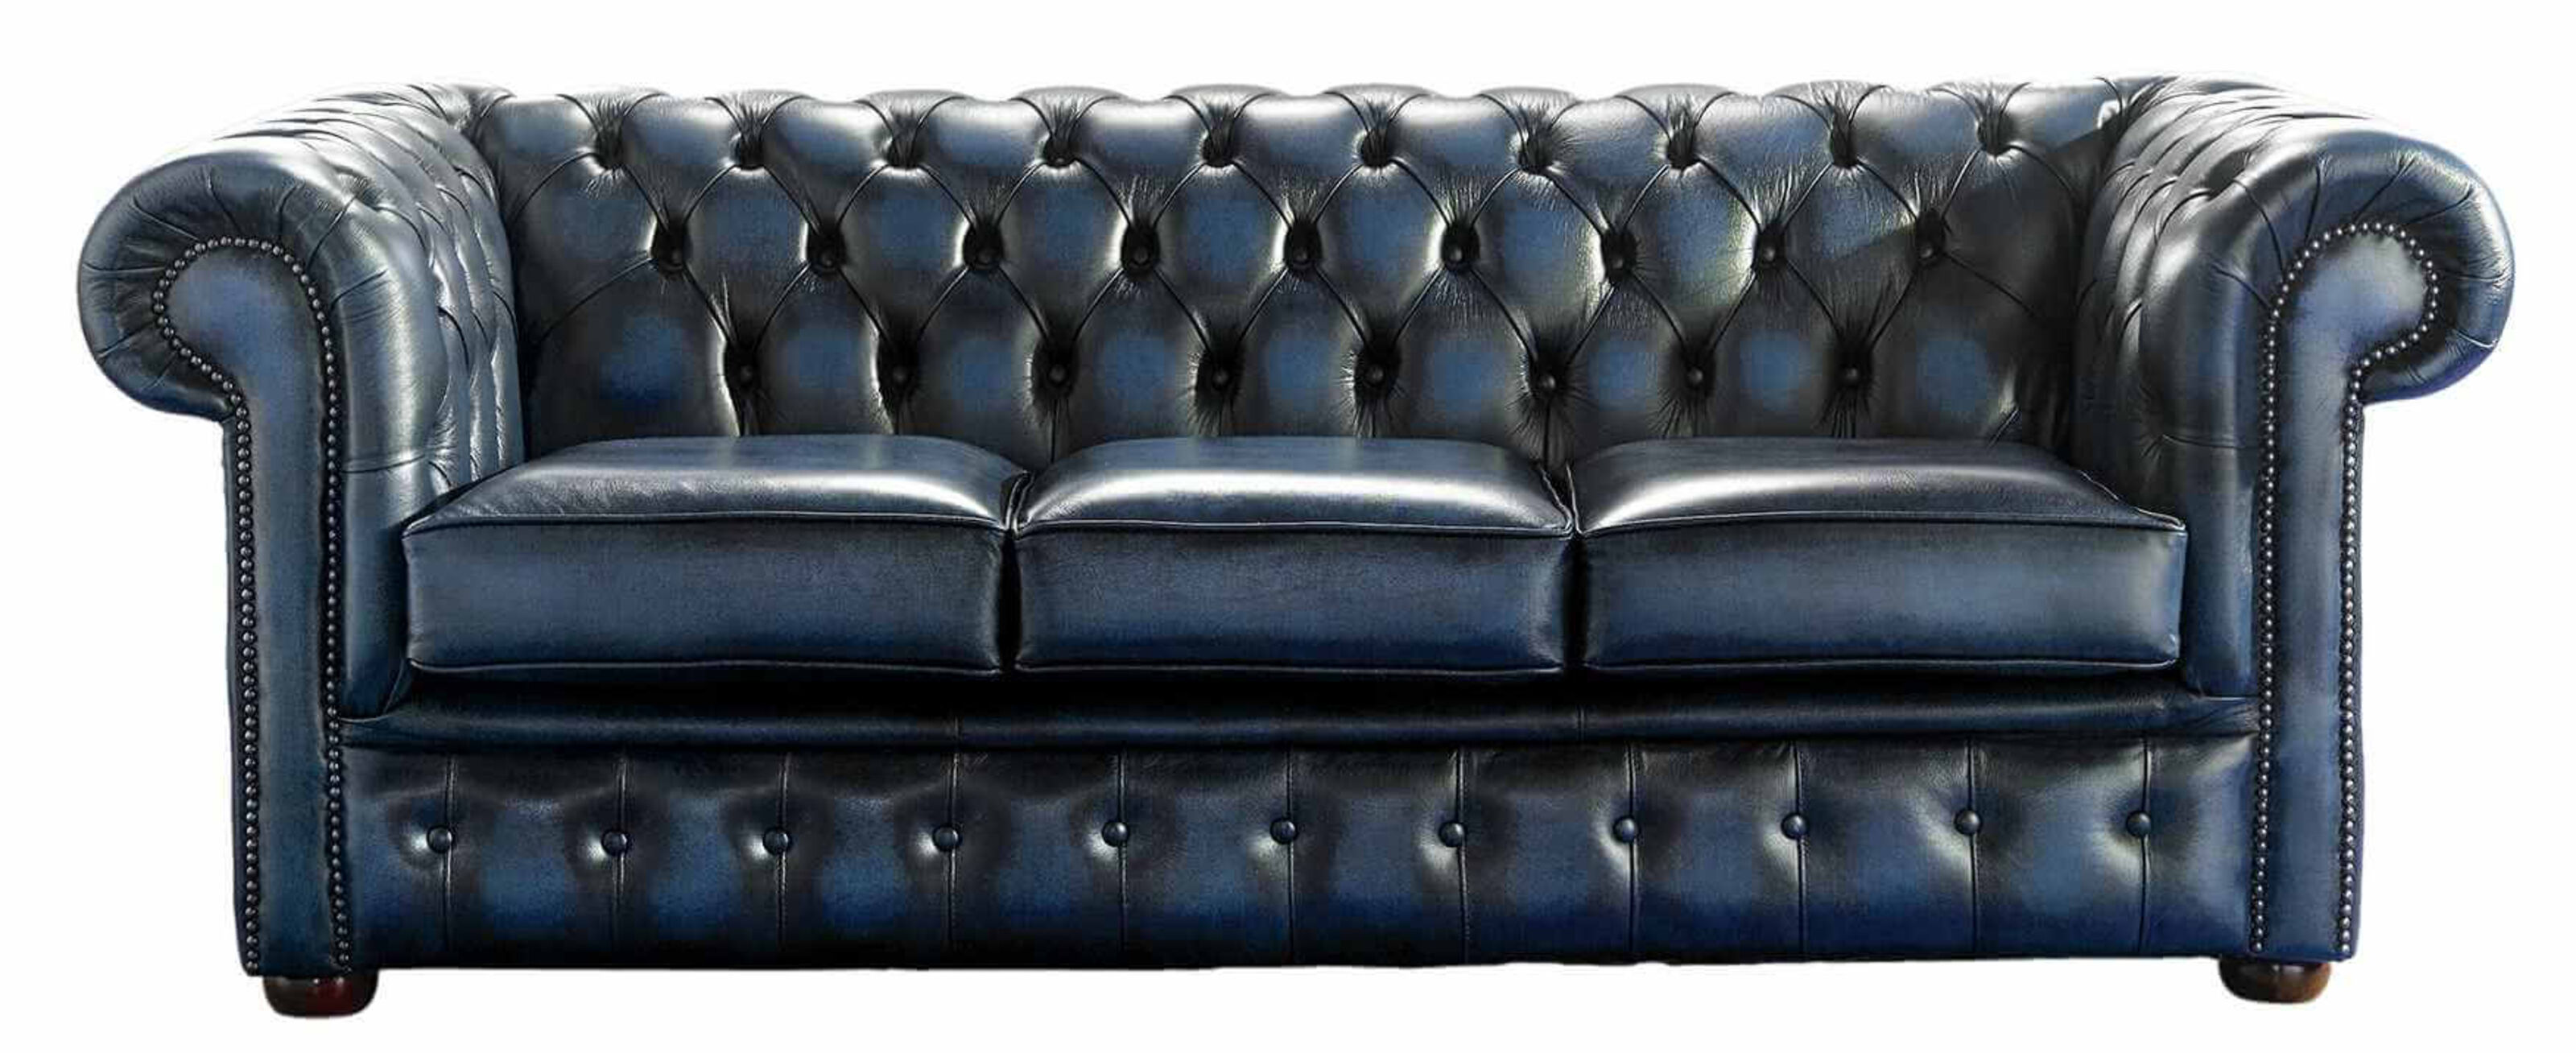 Choosing Between Traditions The Chesterfield versus the Couch  %Post Title